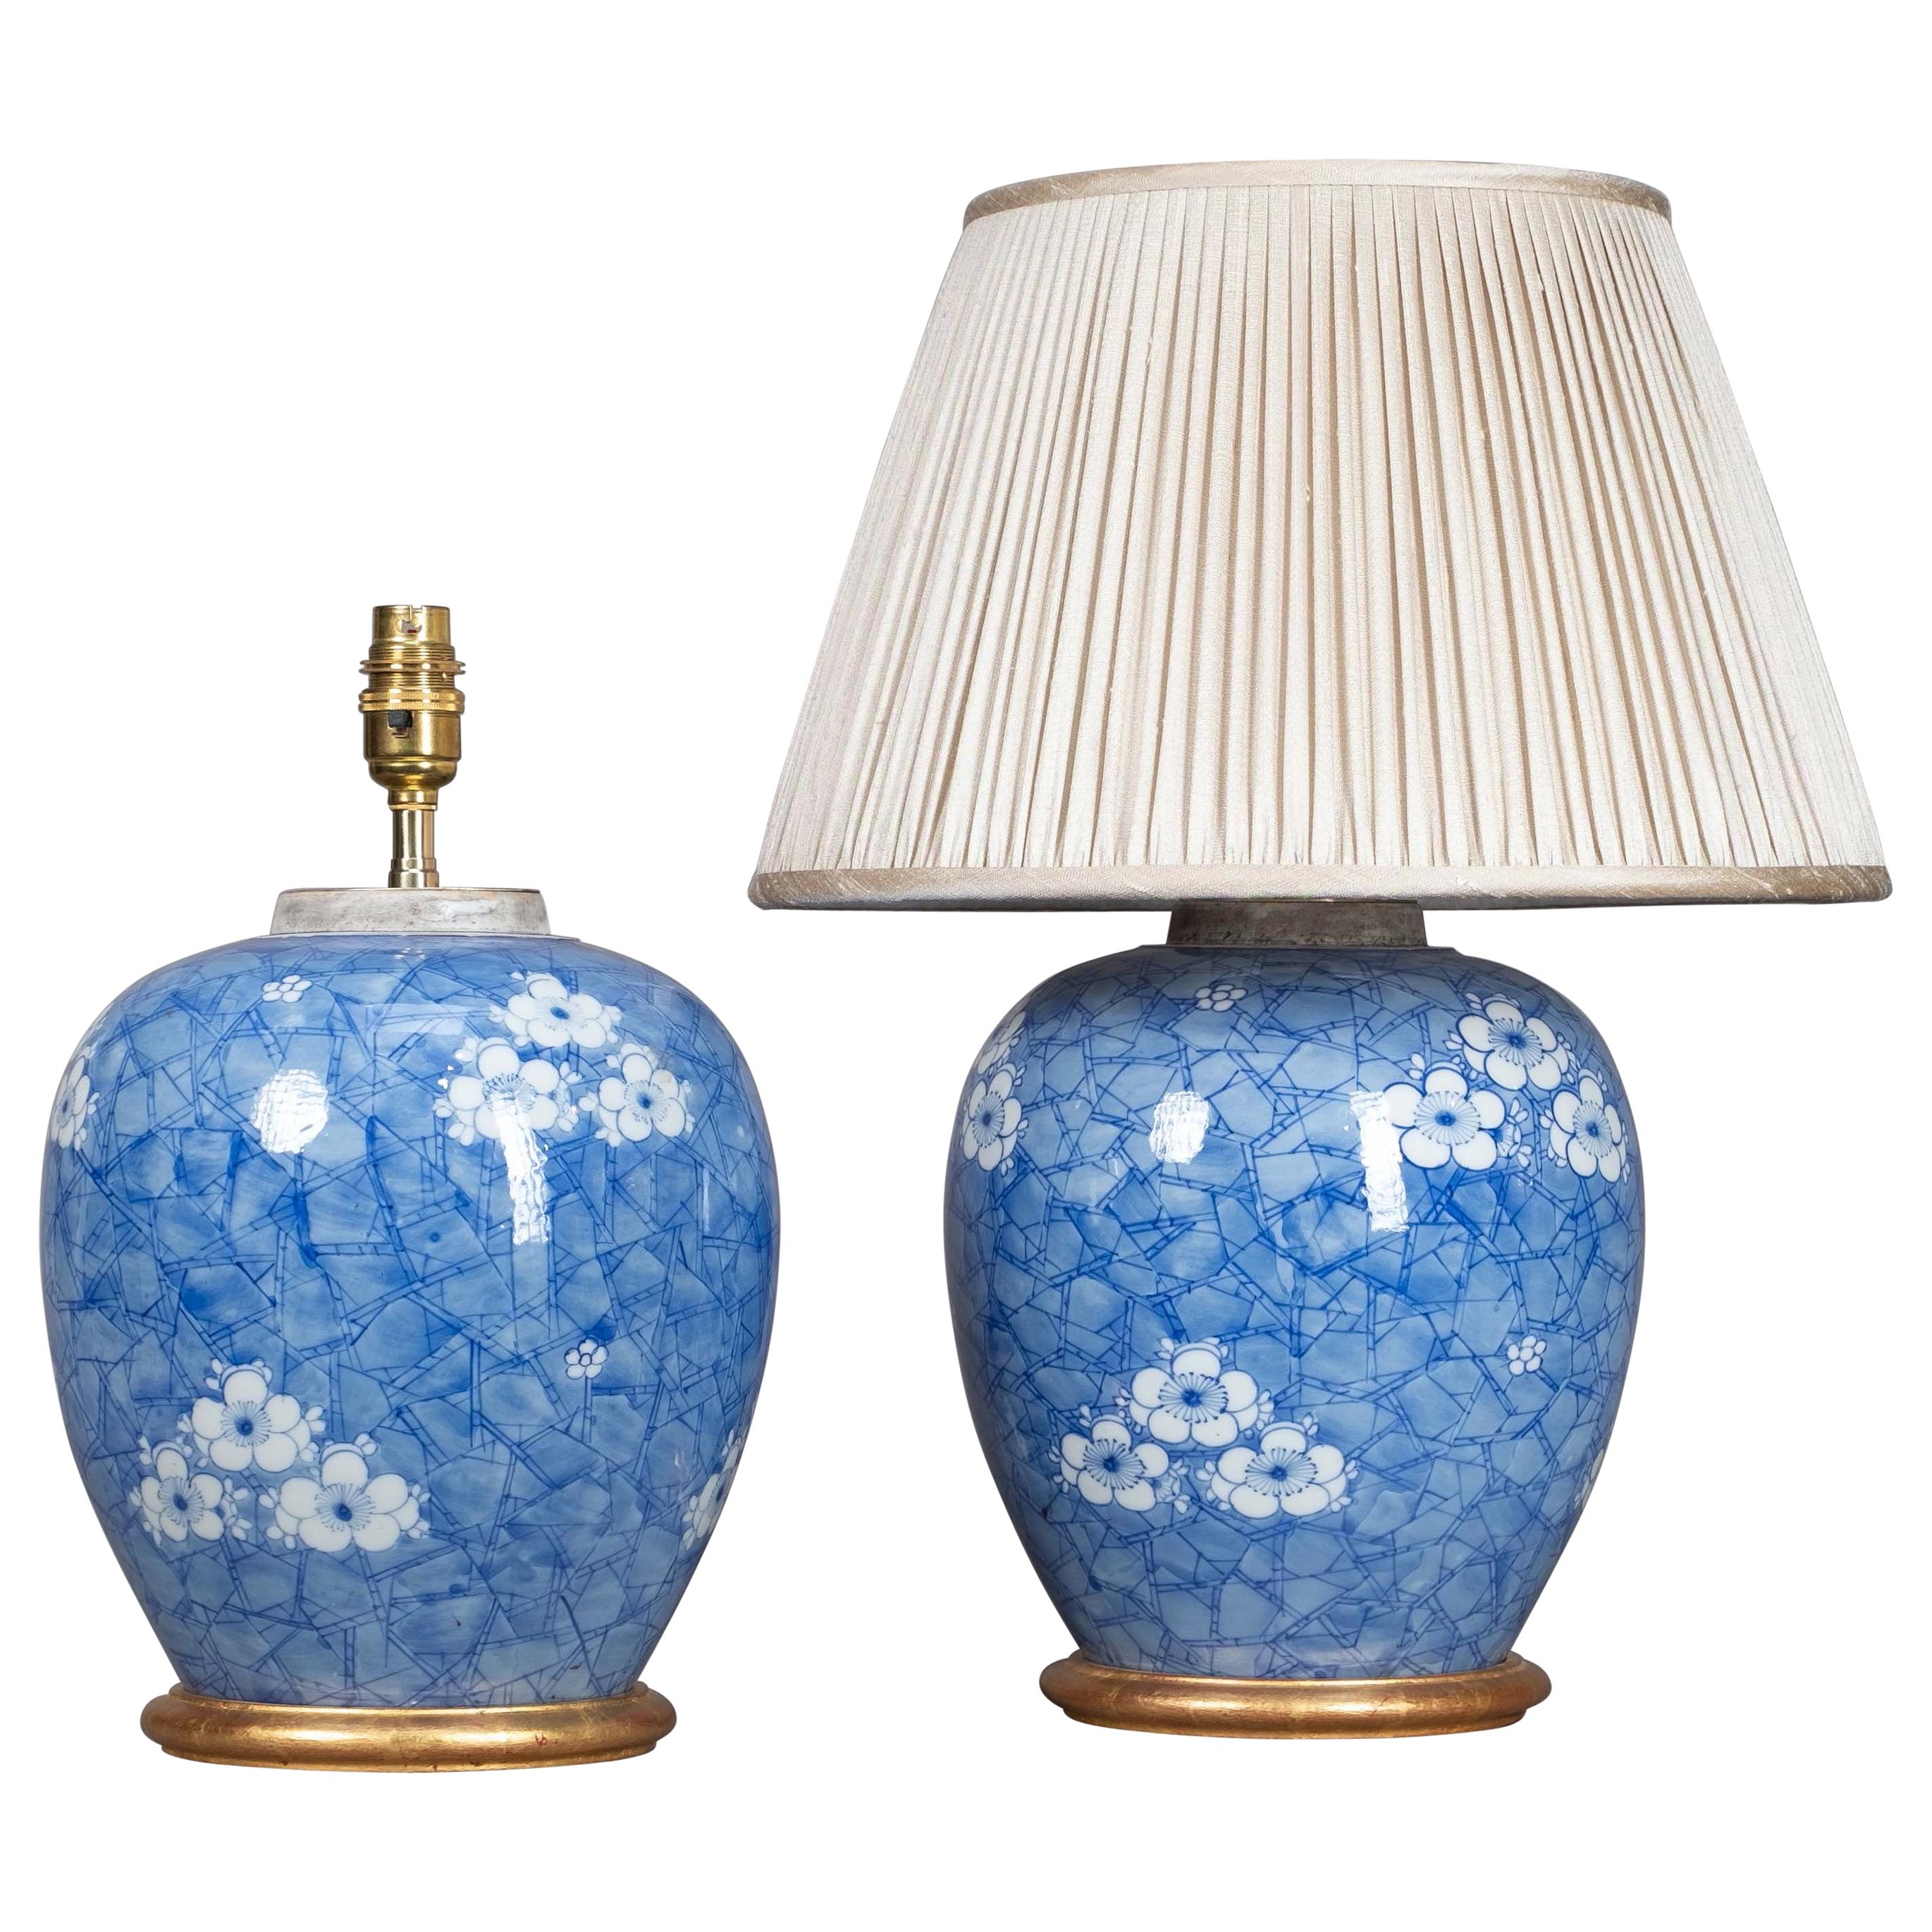 Pair of 19th Century Blue and White Ginger Jar Lamps